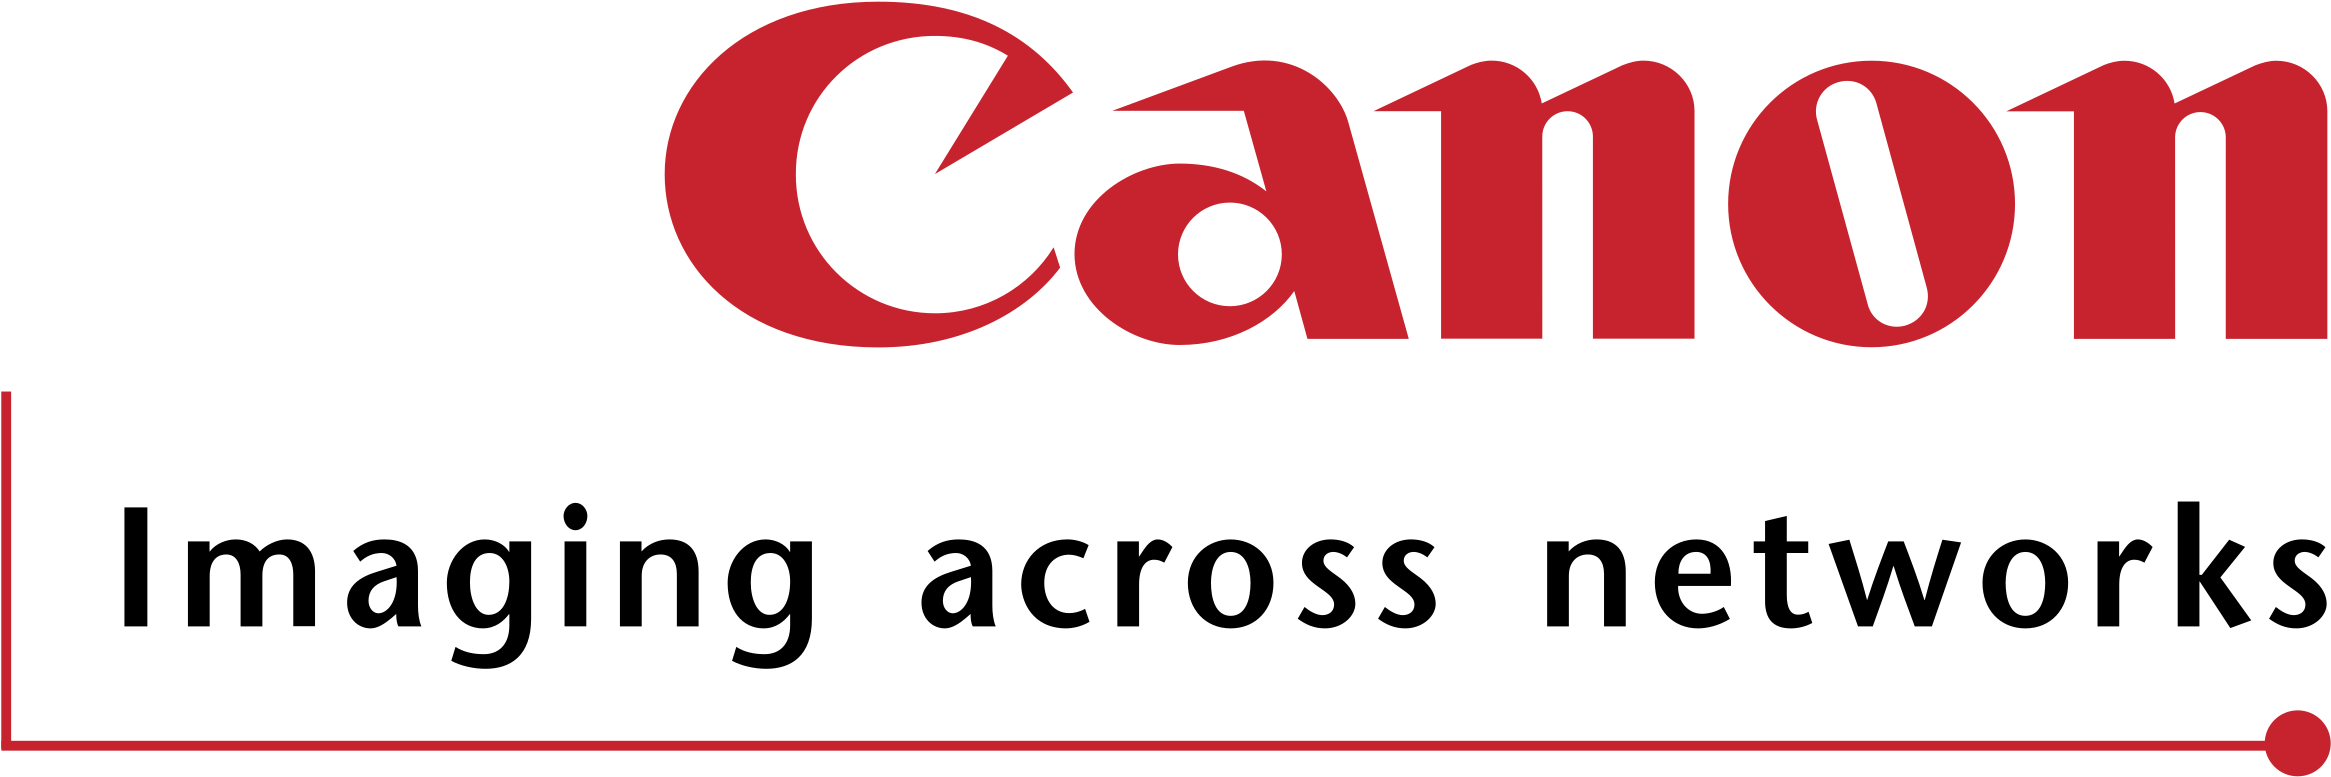 Canon Logo Png 2331 X 777